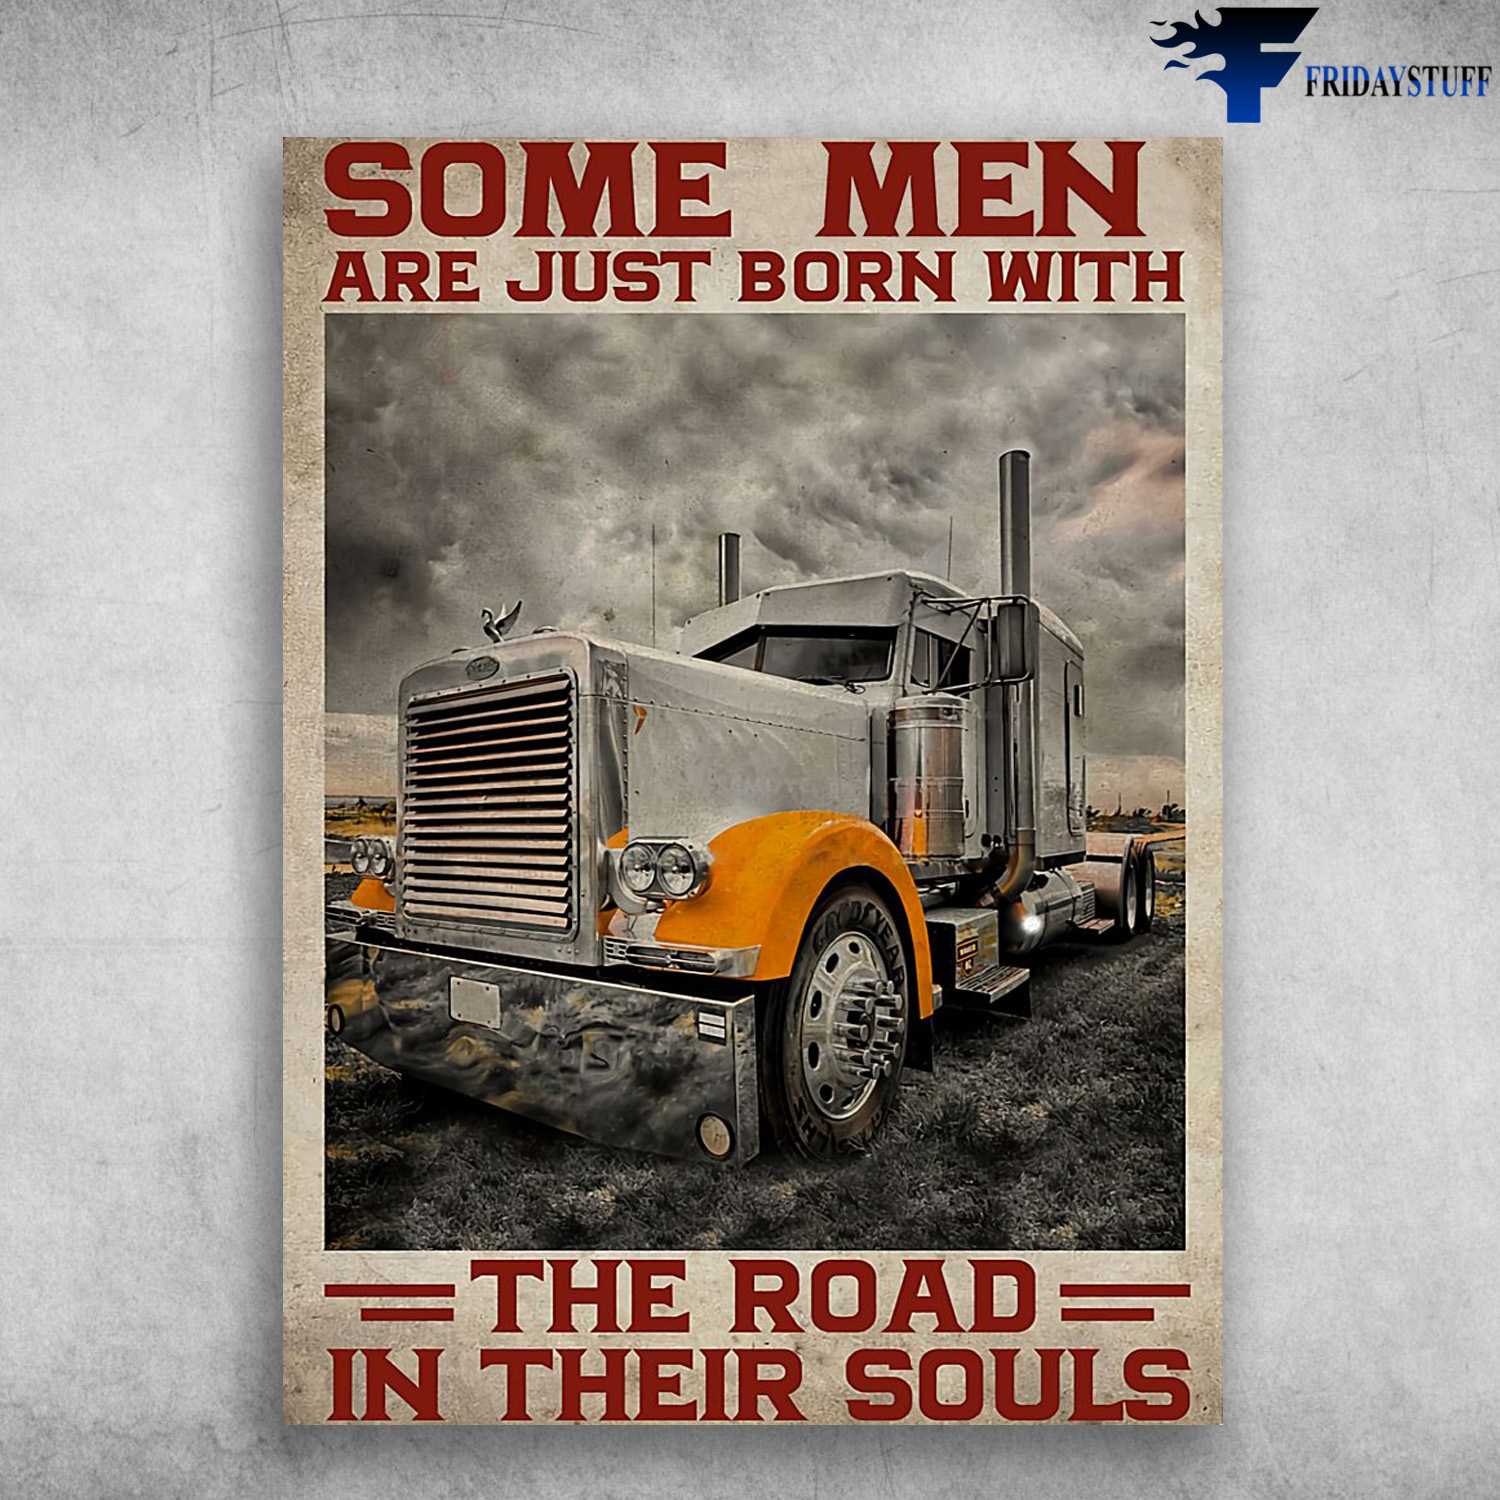 Trucker Poster, Some Men Are Just Born With, The Road In Their Souls